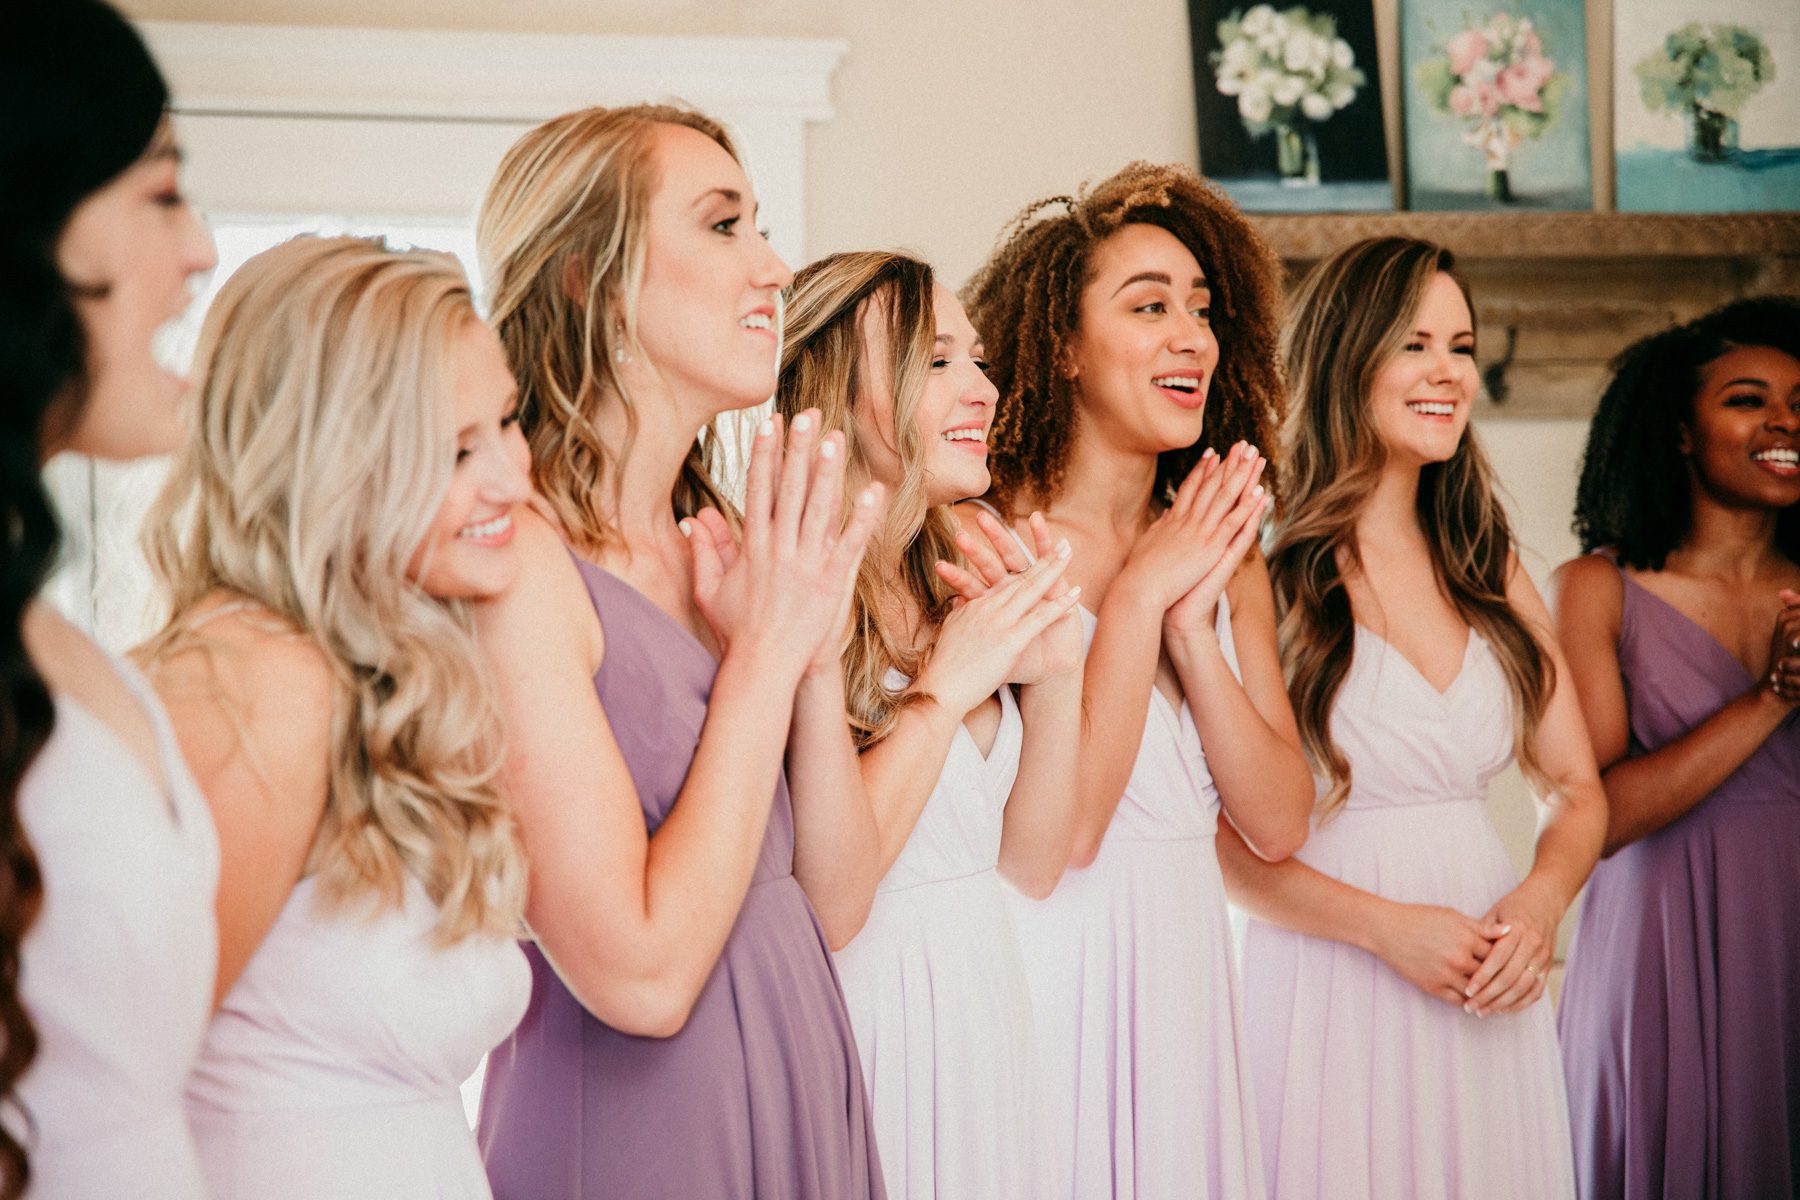 Bridesmaids reactions to bride's dress reveal 